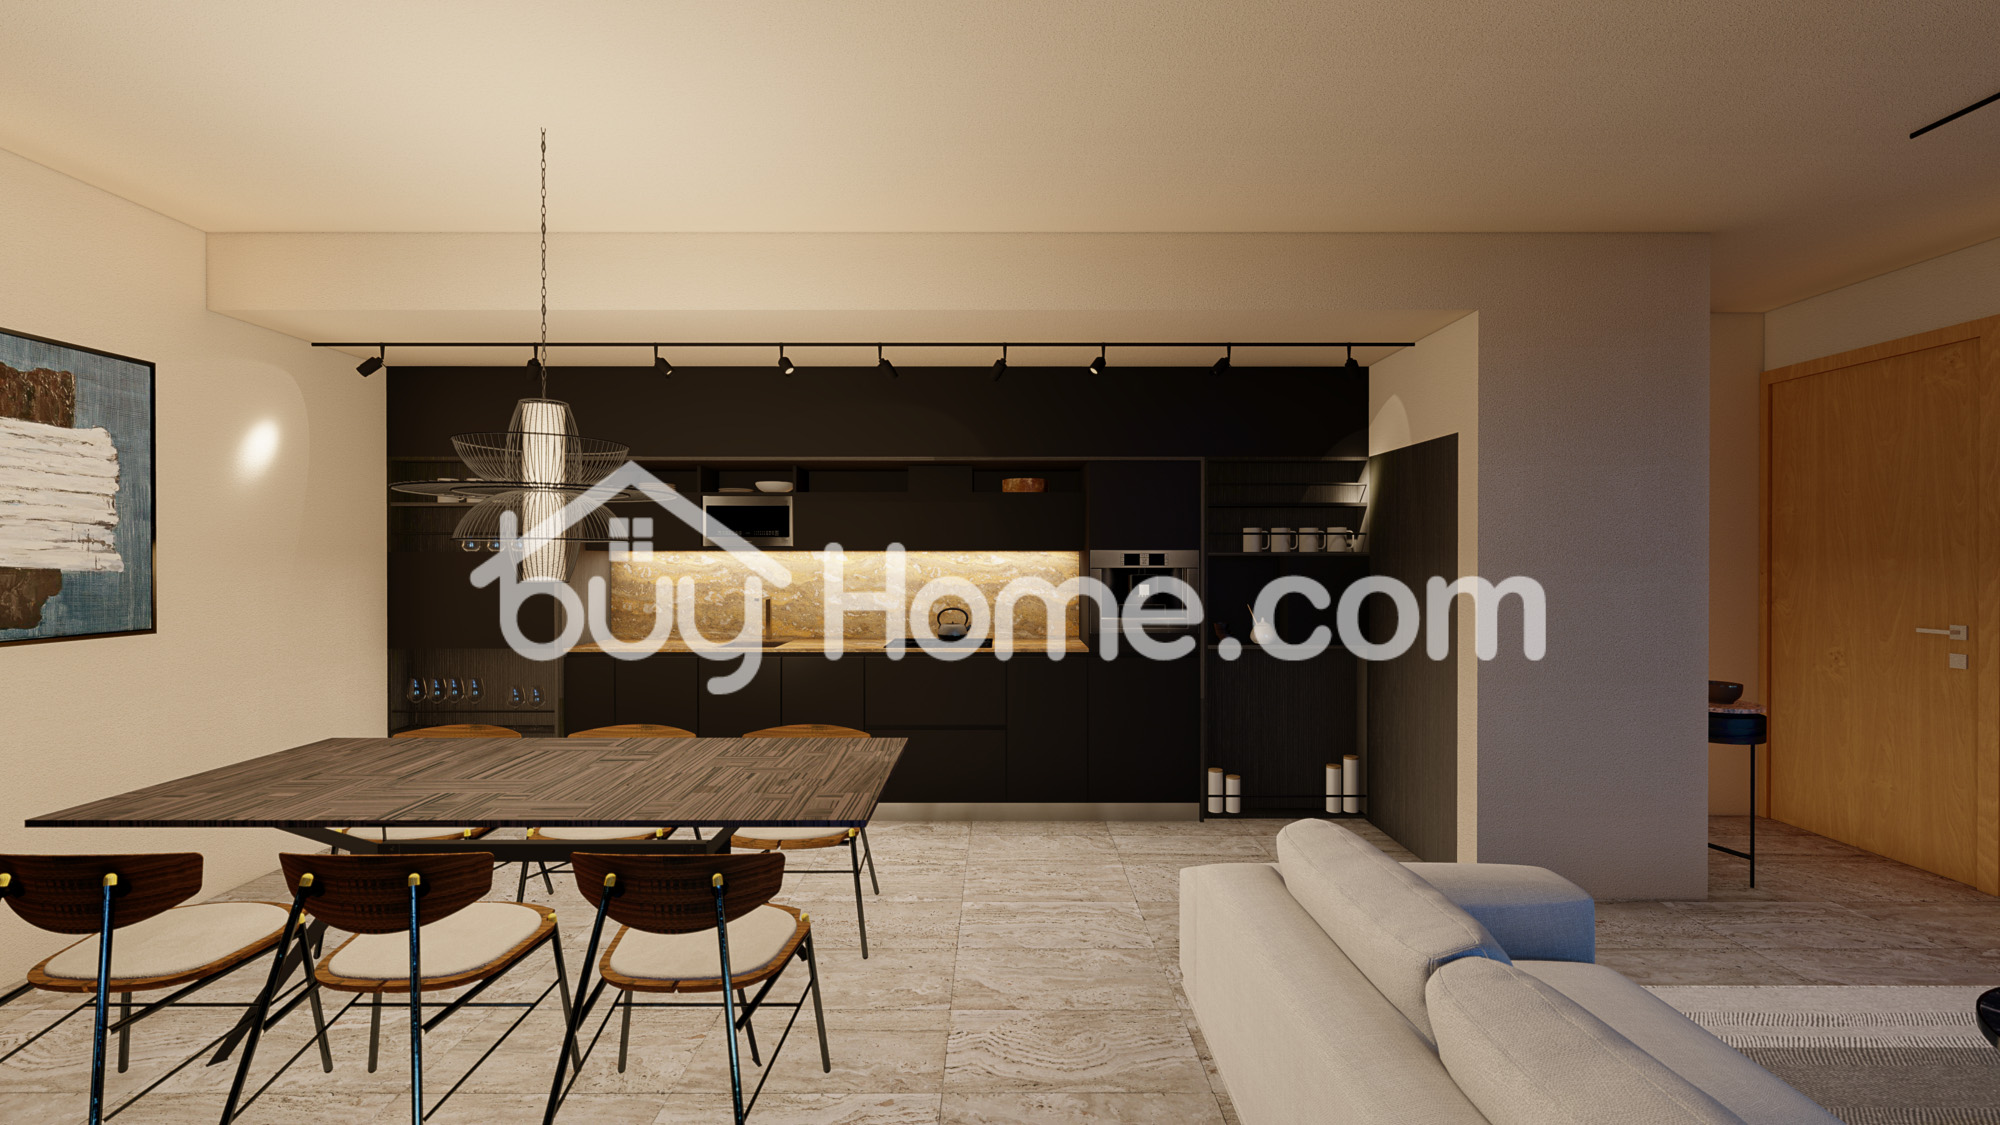 3 BDR apartment | BuyHome